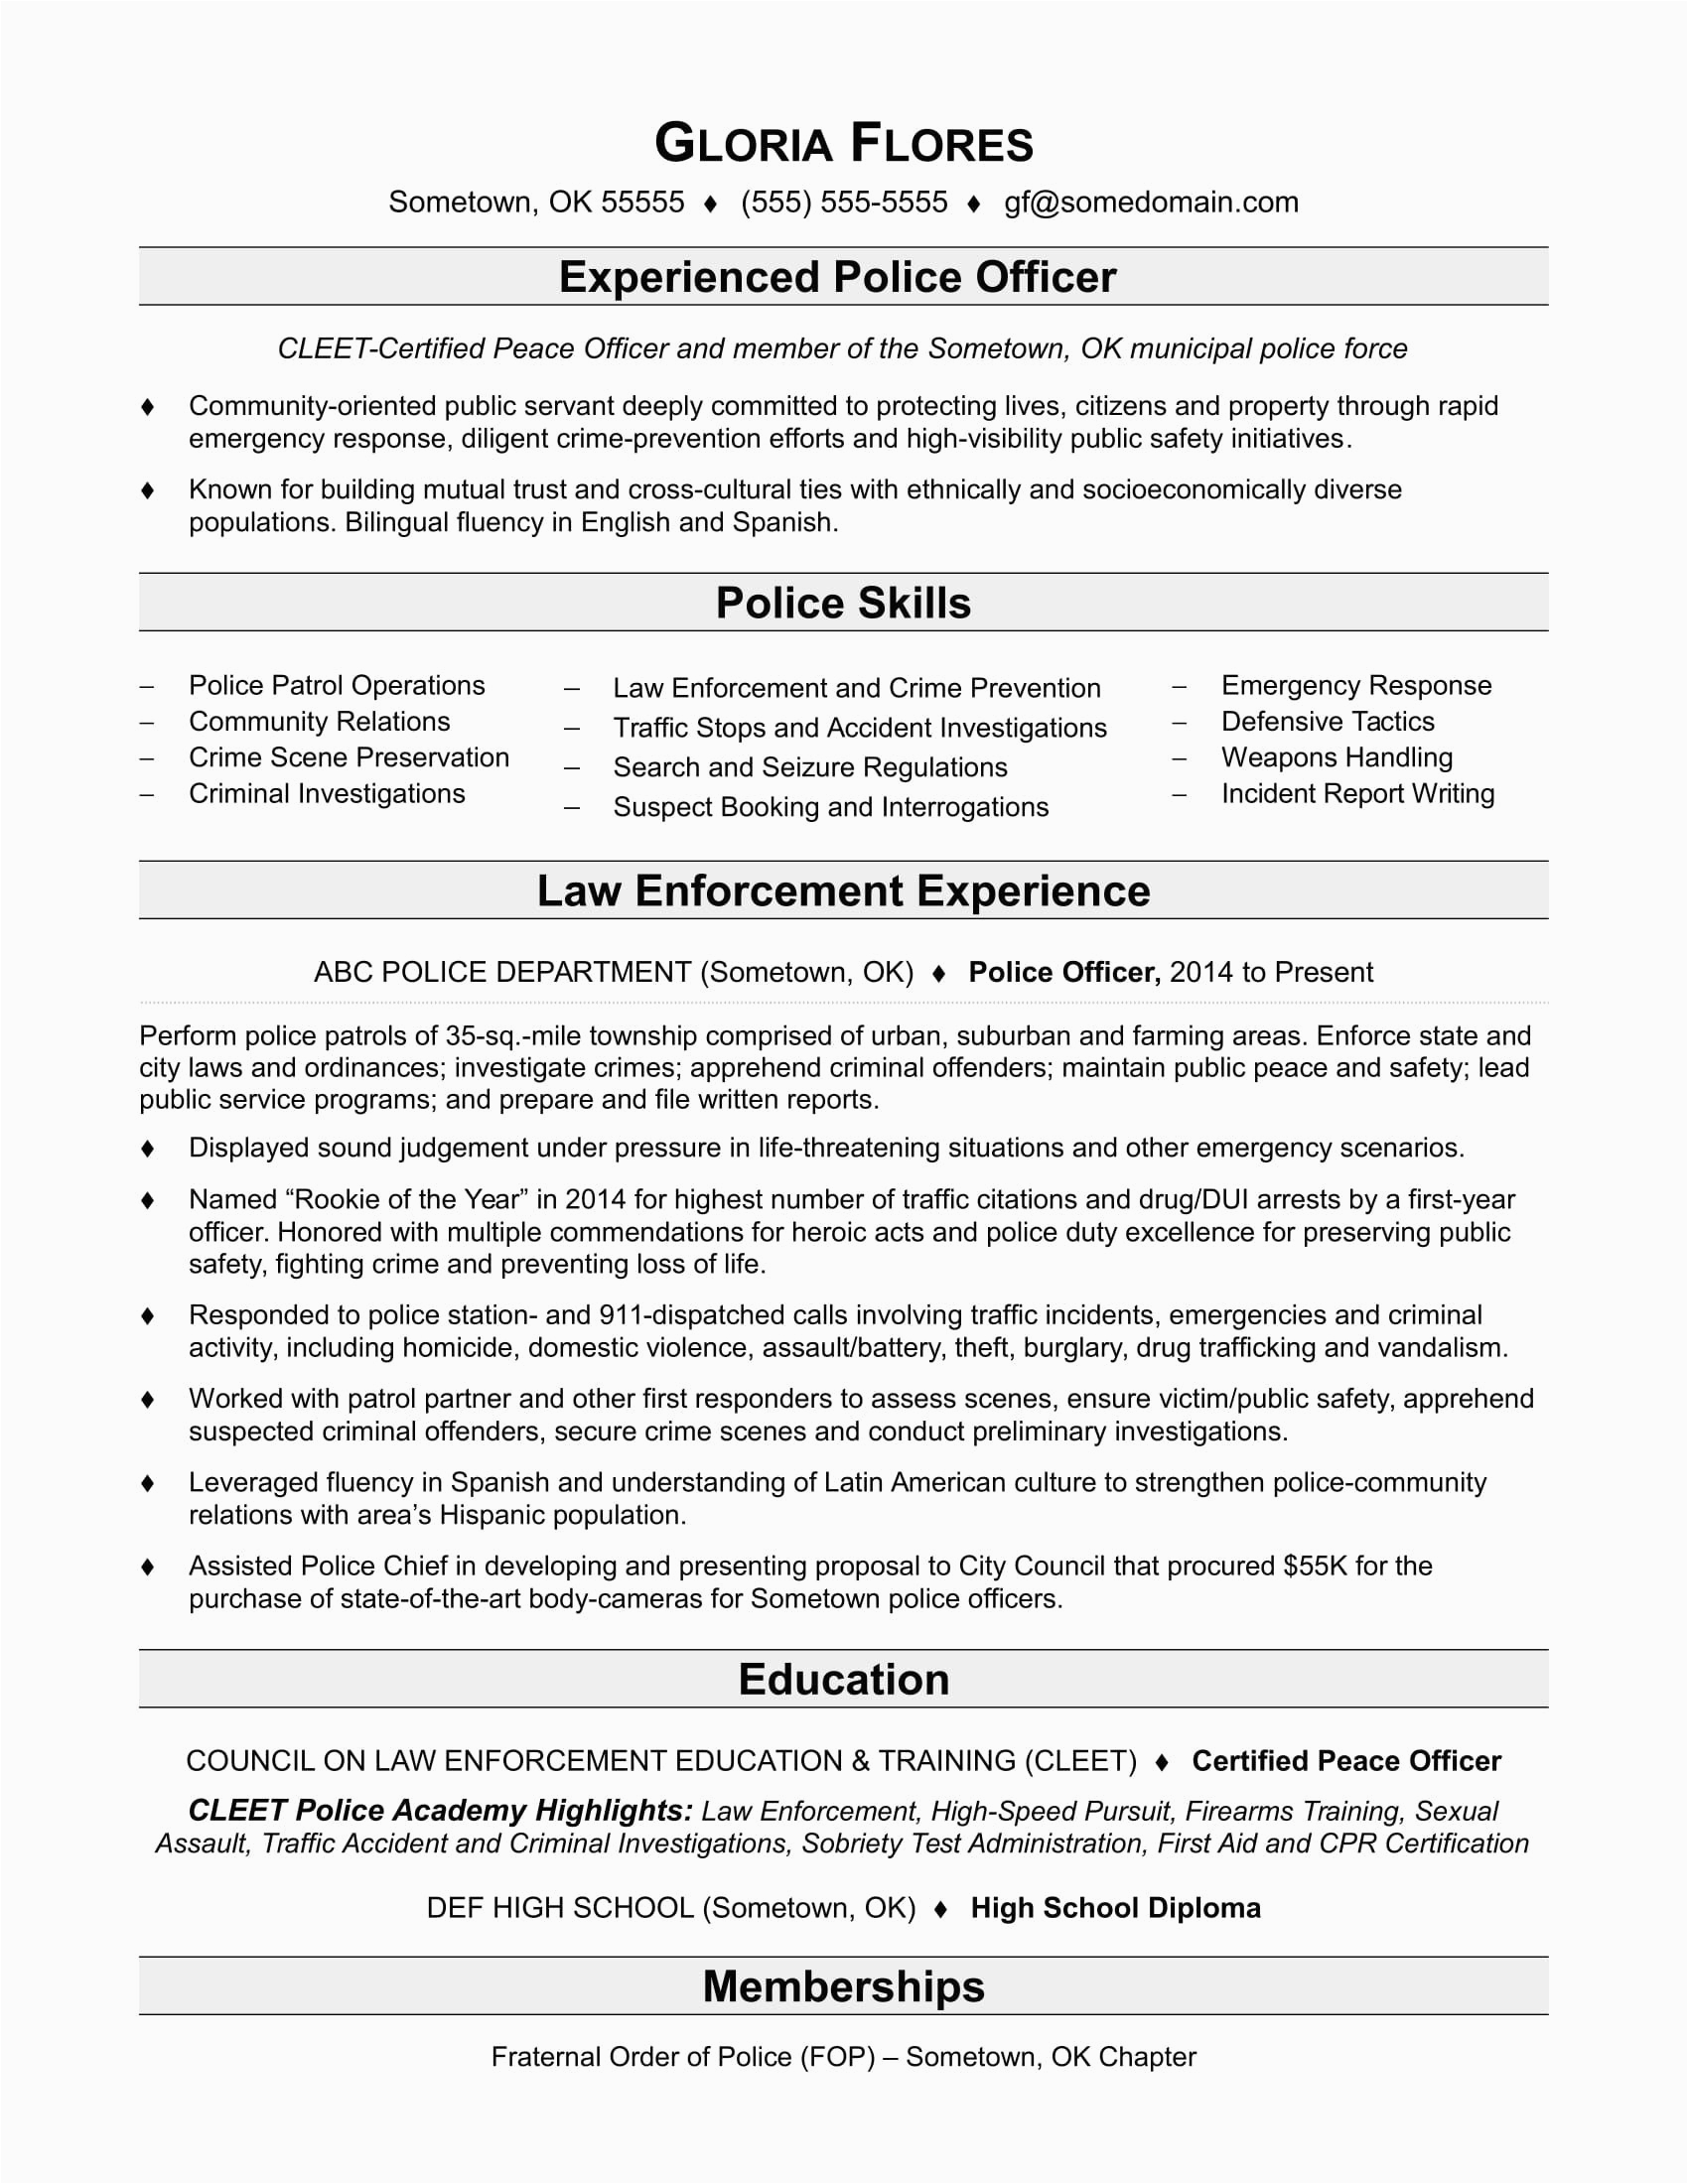 Police Officer Resume Objective Statement Samples Resume Examples Law Enforcement Resume Templates